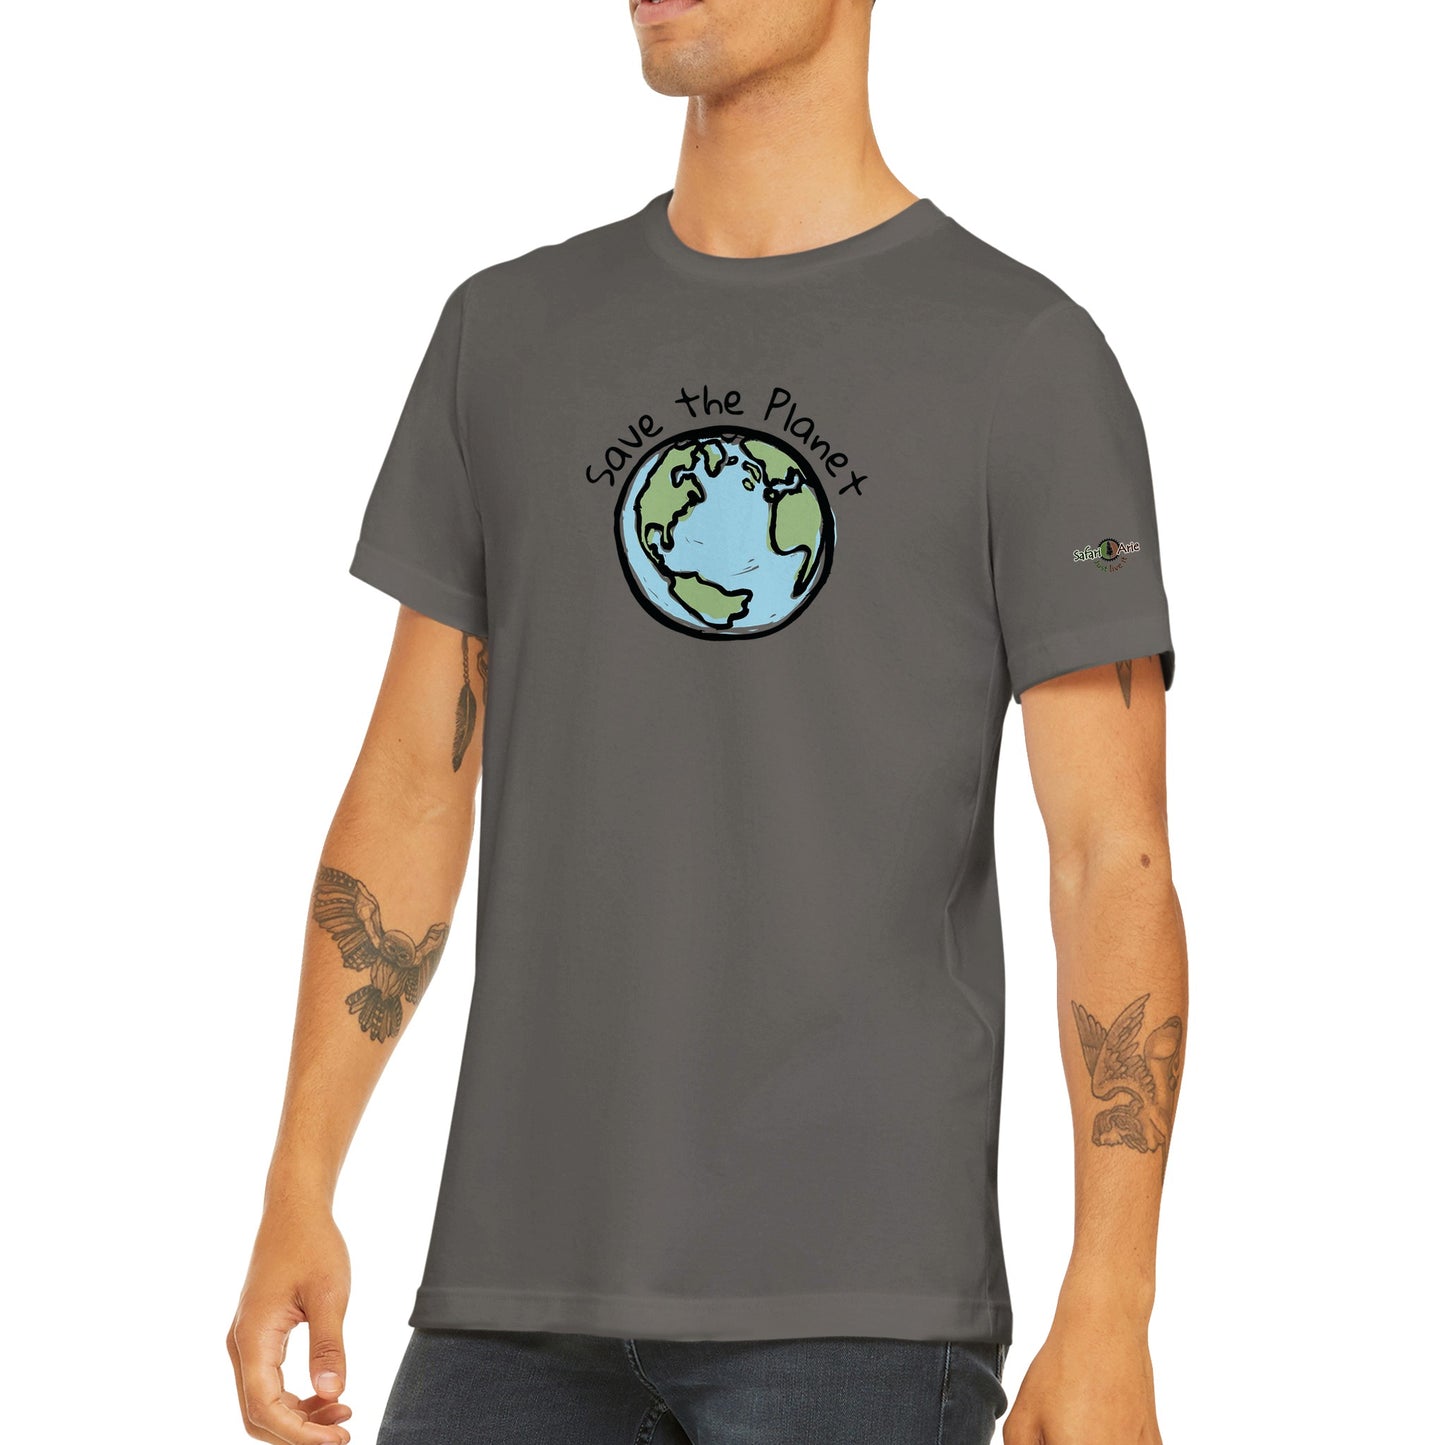 Save the planet unisex t-shirt